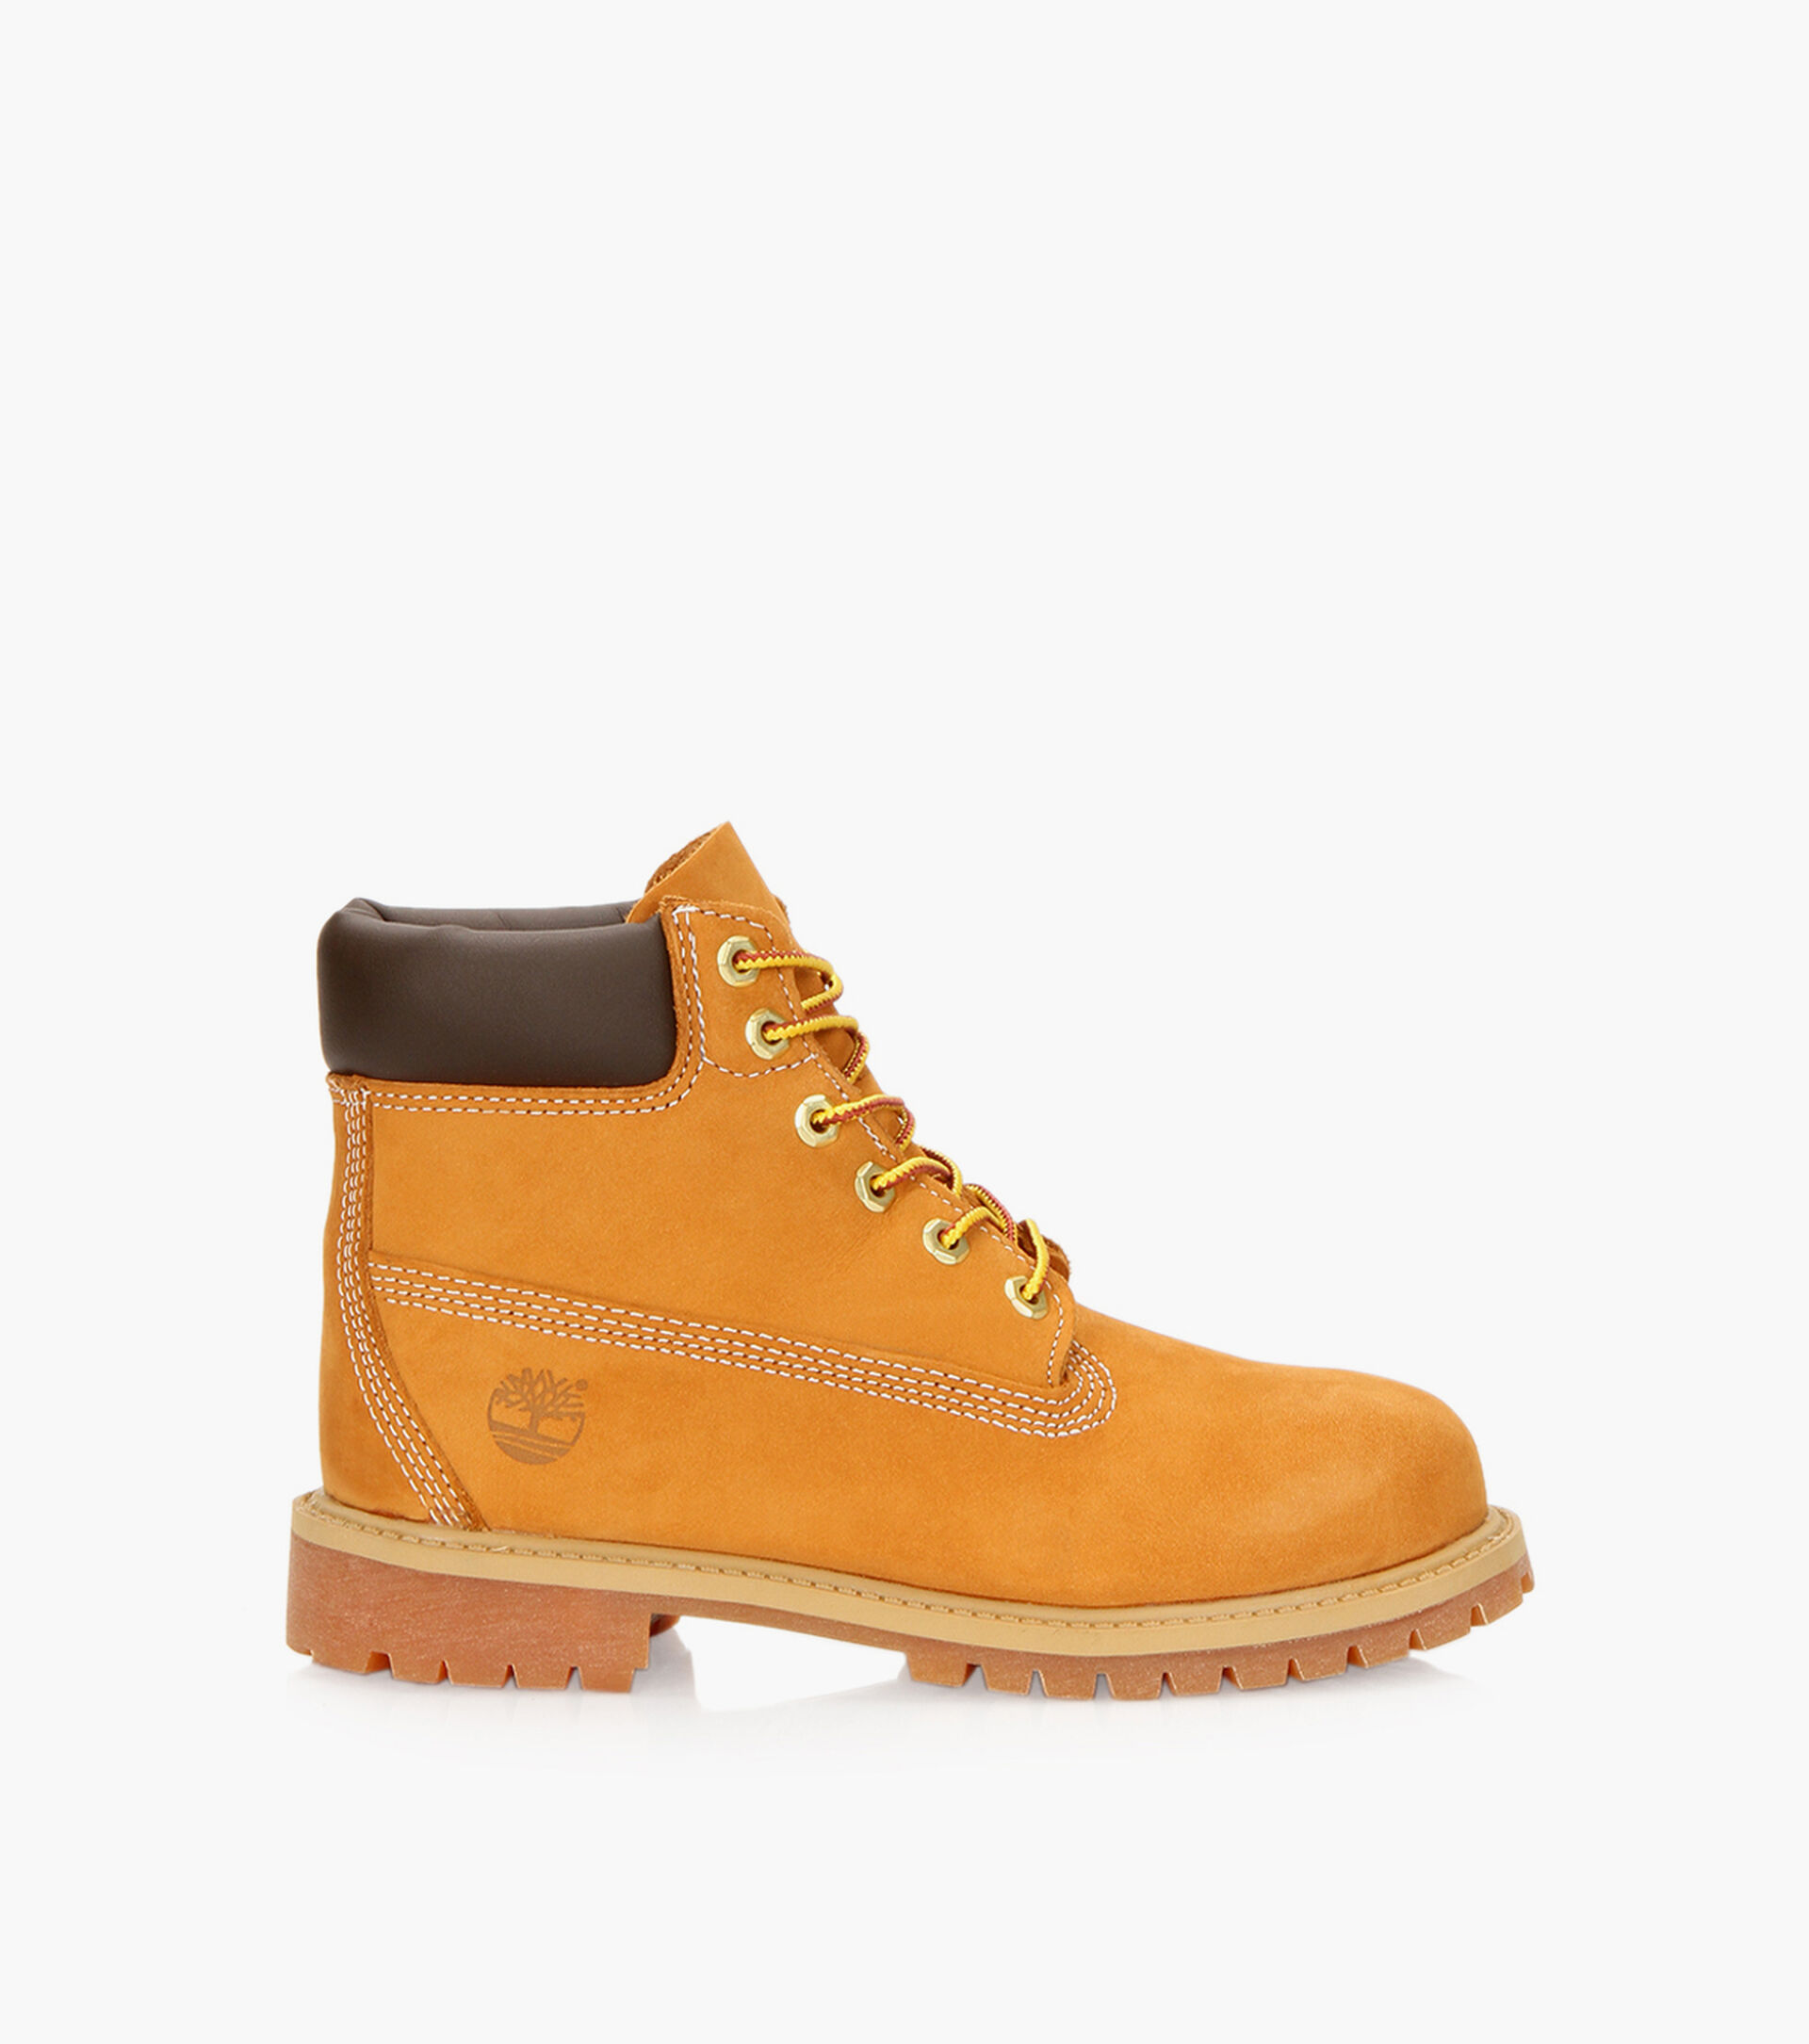 TIMBERLAND 6-INCH PREMIUM WATERPROOF BOOT | Browns Shoes